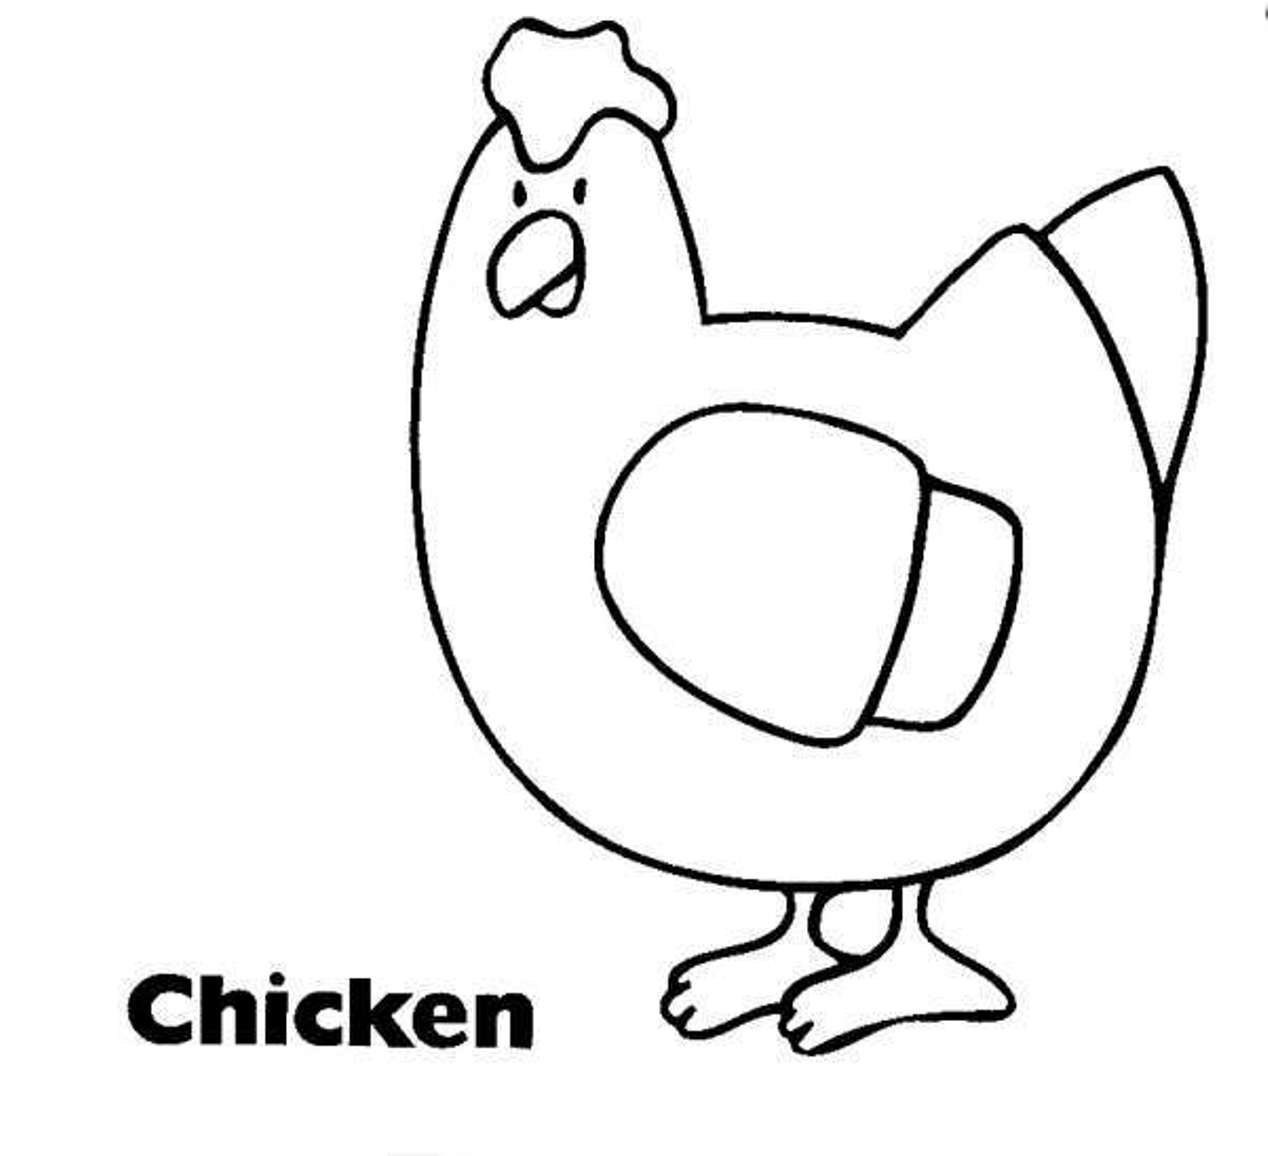 Preschool Coloring Sheets Of A Chicken Free Printable
 Farm Animals Coloring Pages coloringsuite